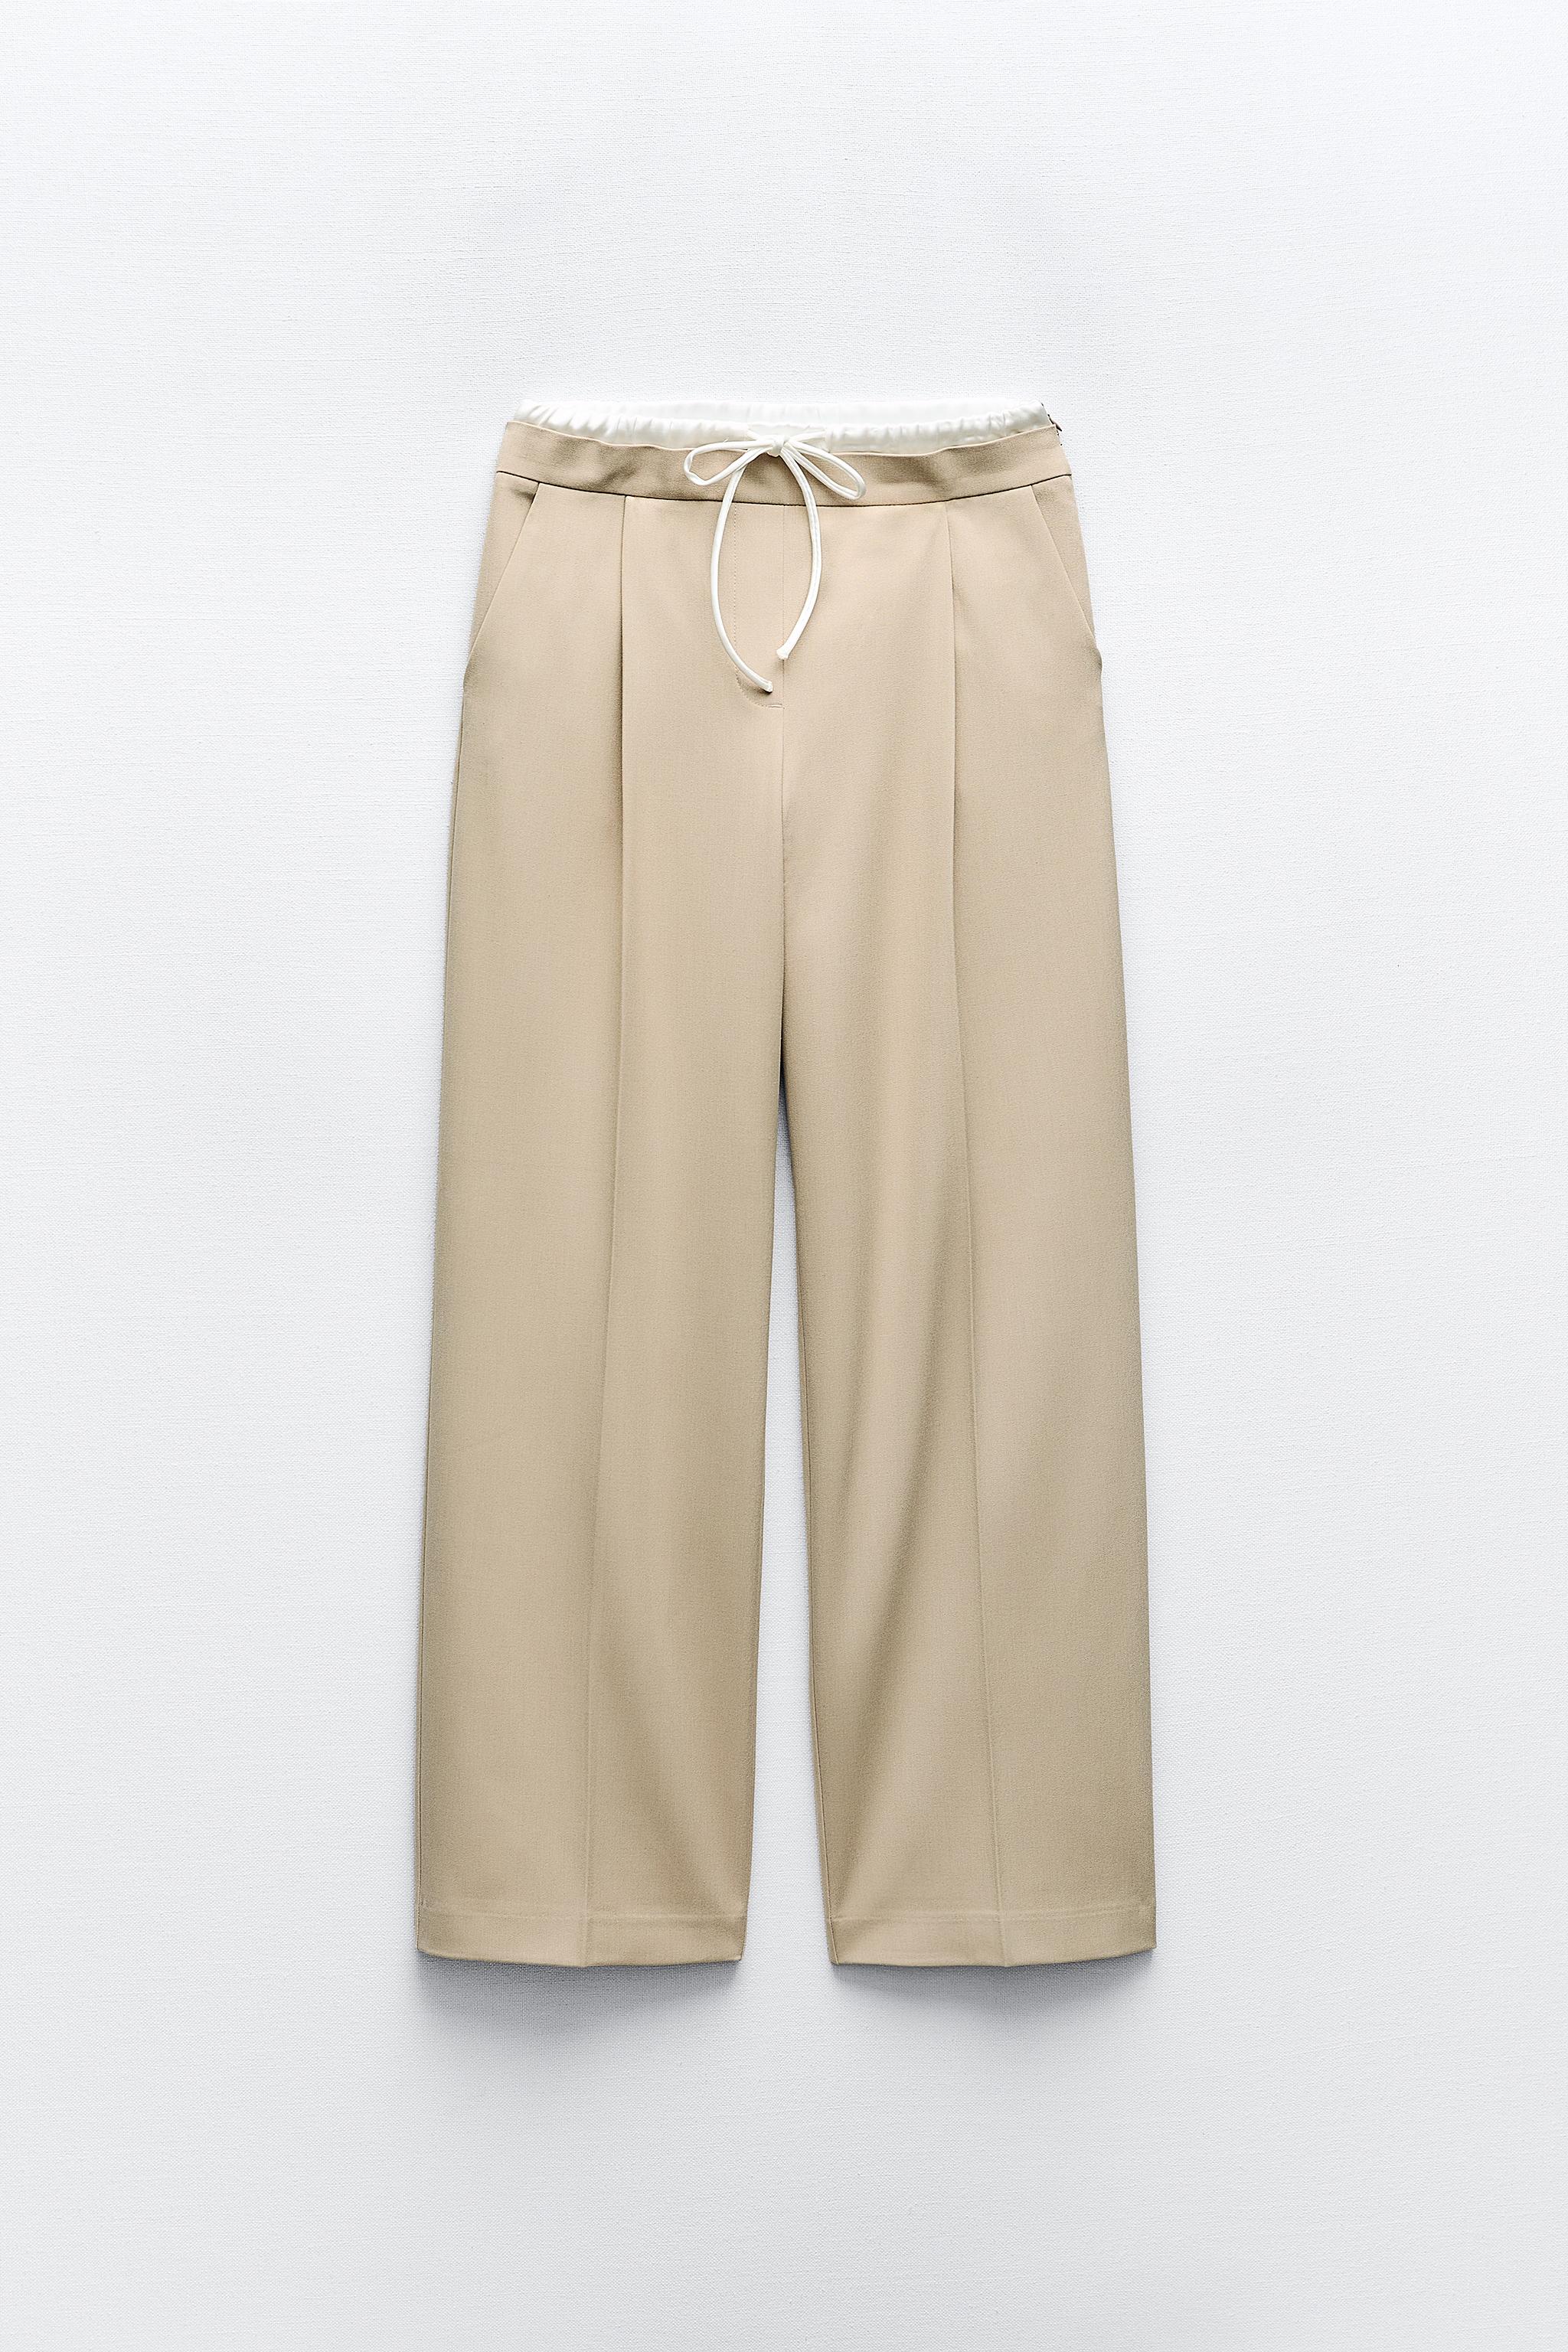 Zara Women Belted trousers 1478/030/803 (Large): Buy Online at